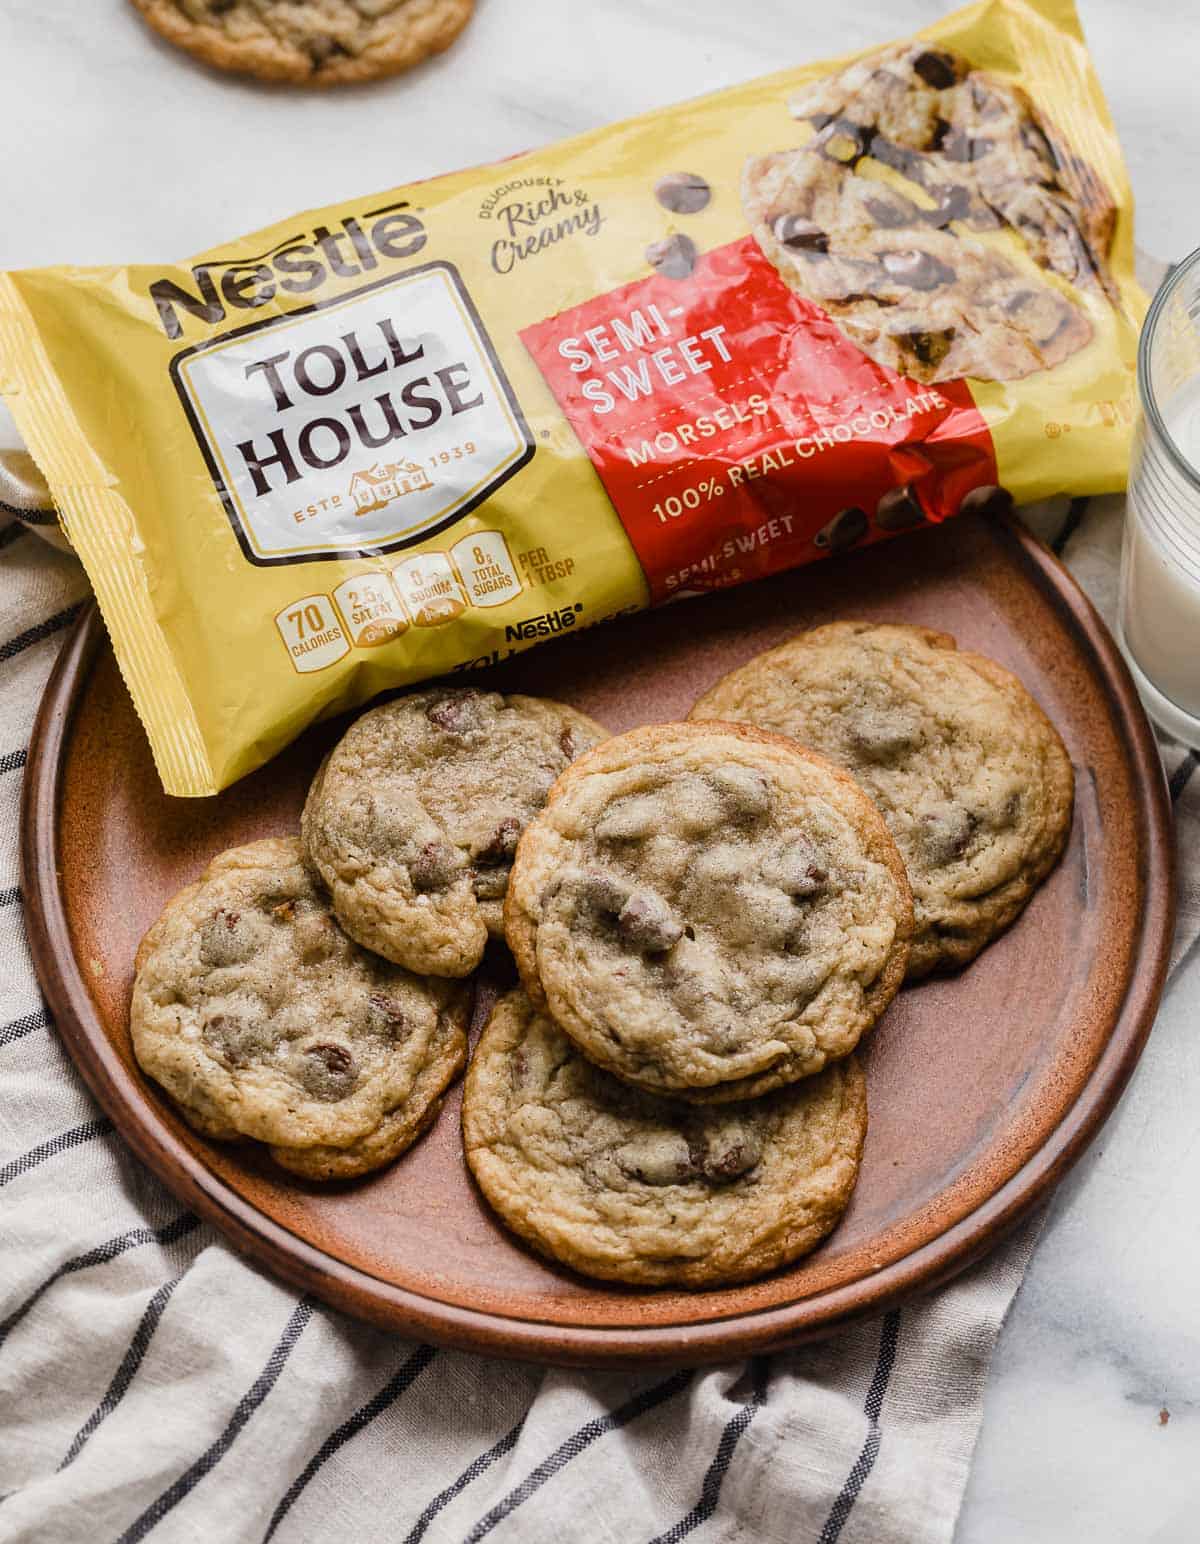 Nestle Toll House Chocolate Chip Cookies on a brown plate with a bag of Nestle chocolate chips in the background.